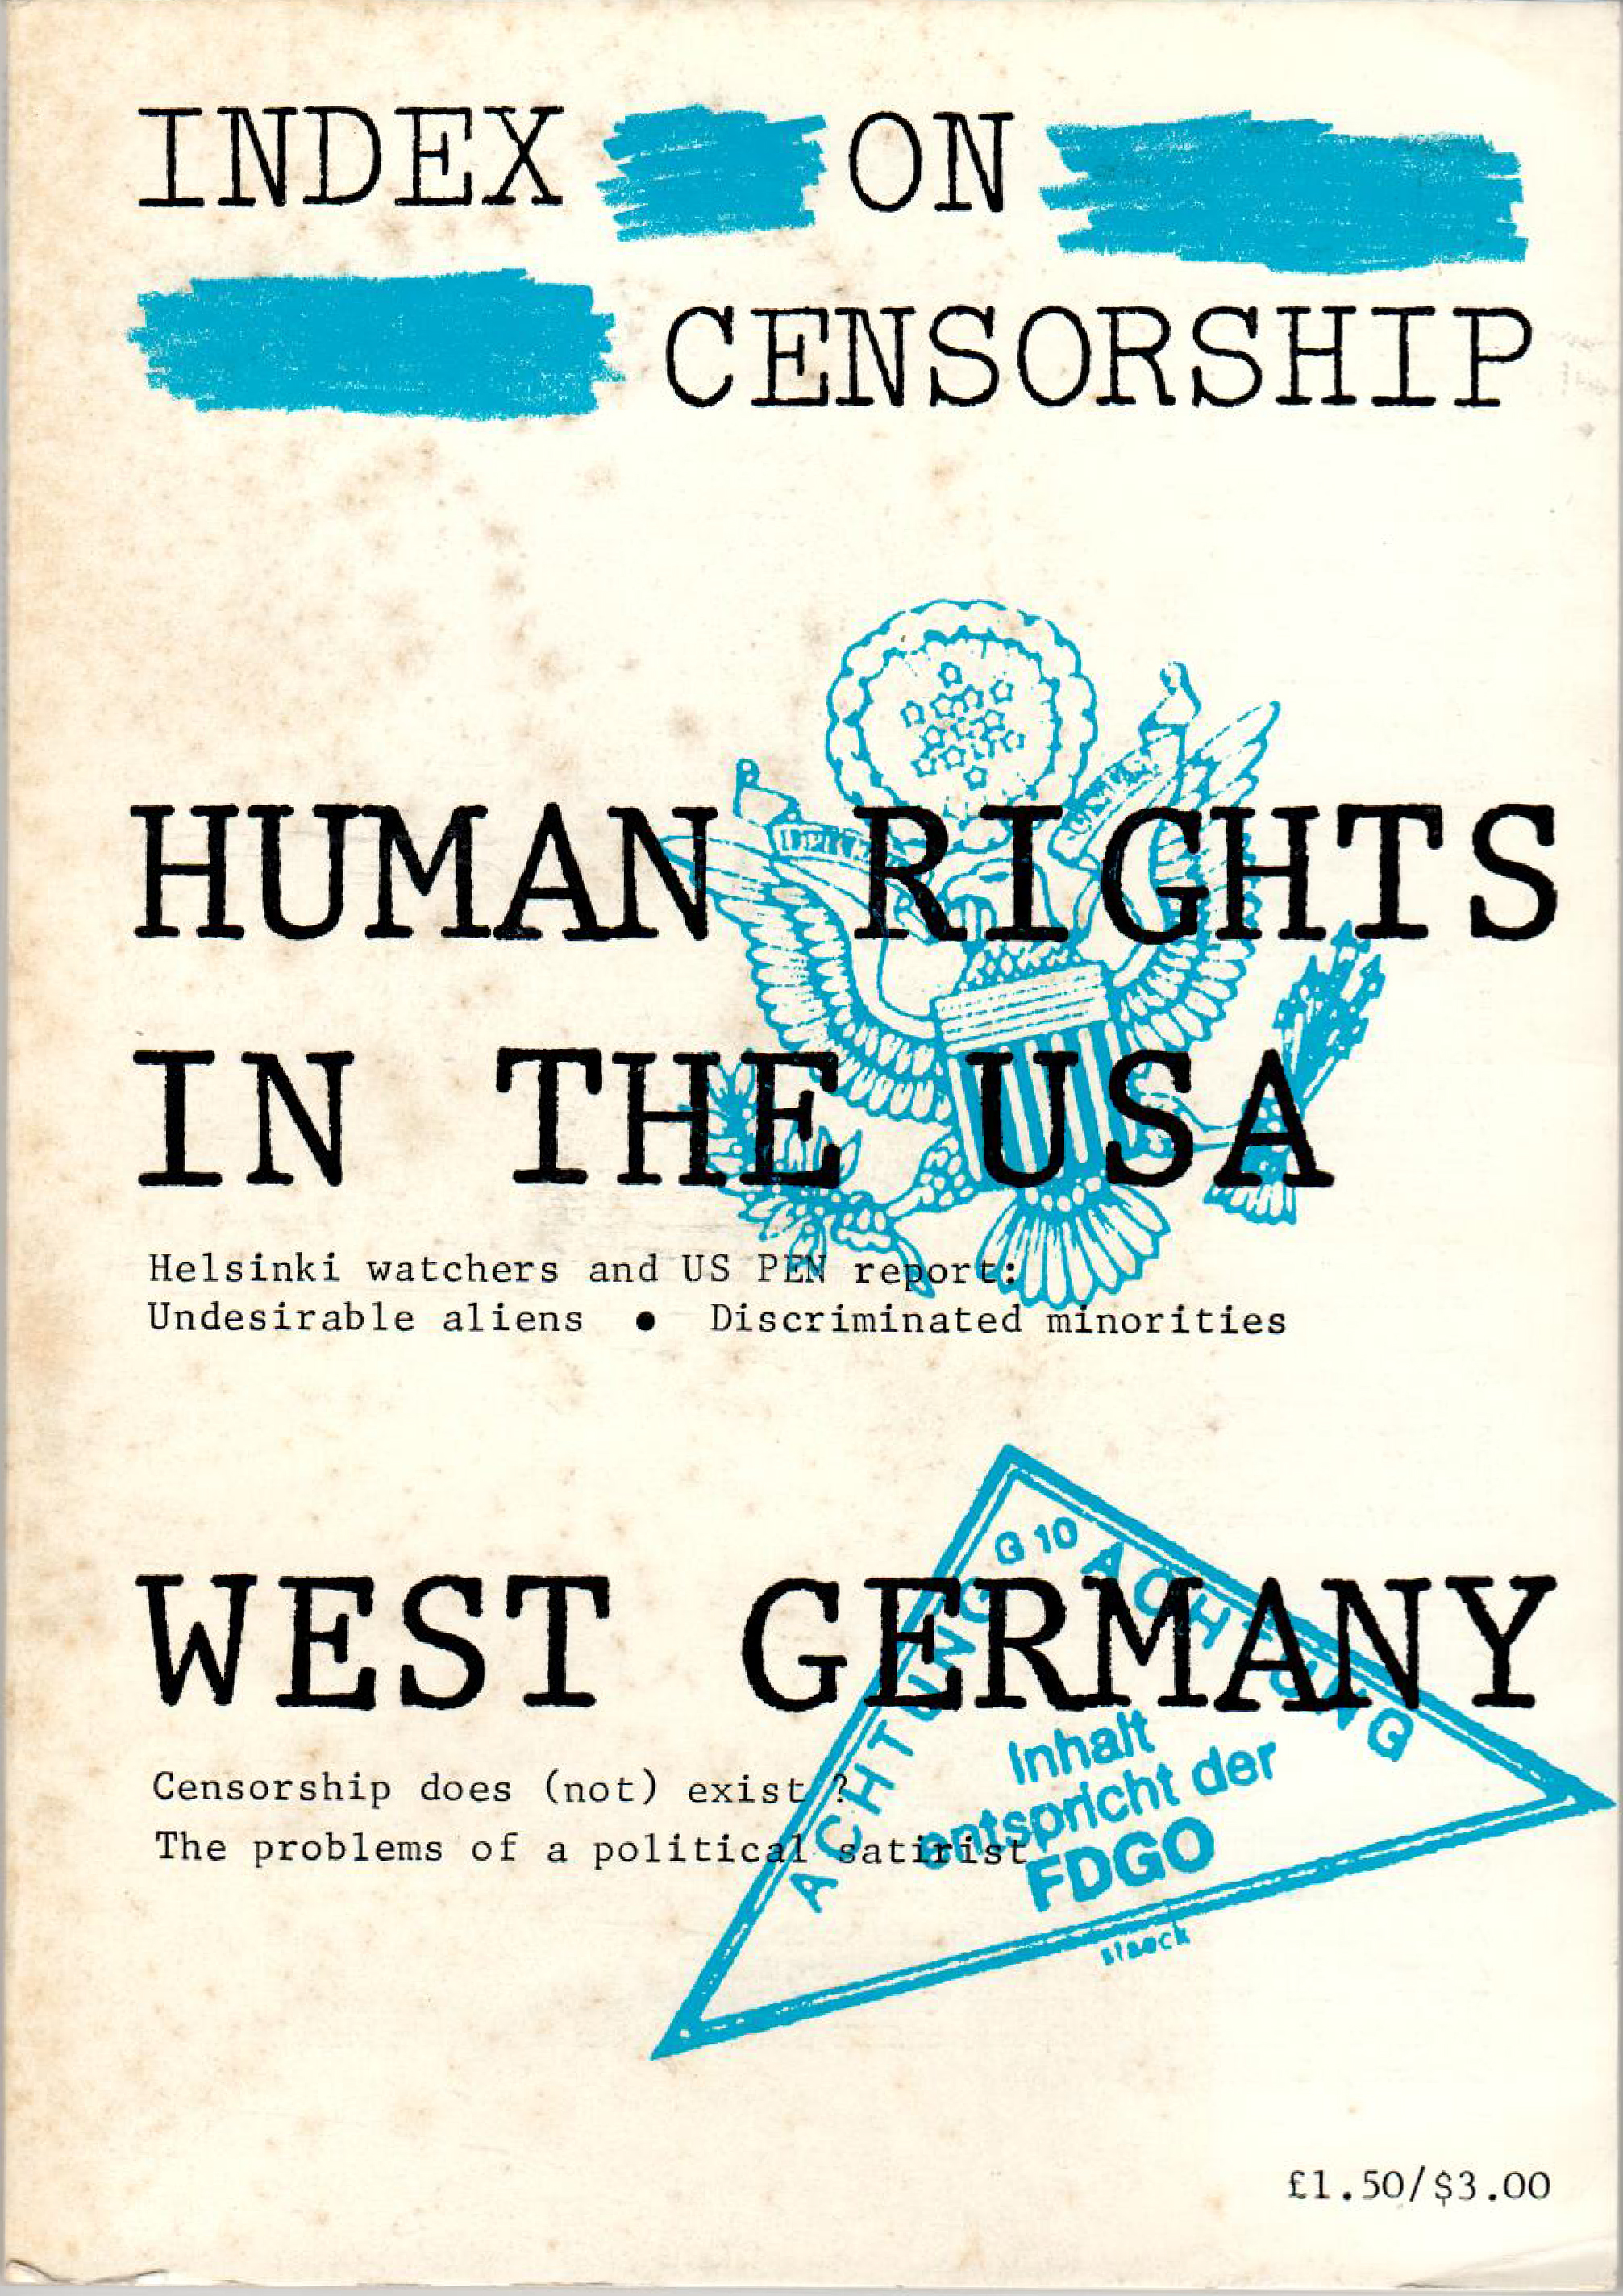 Human rights in the USA, the October 1980 issue of Index on Censorship magazine